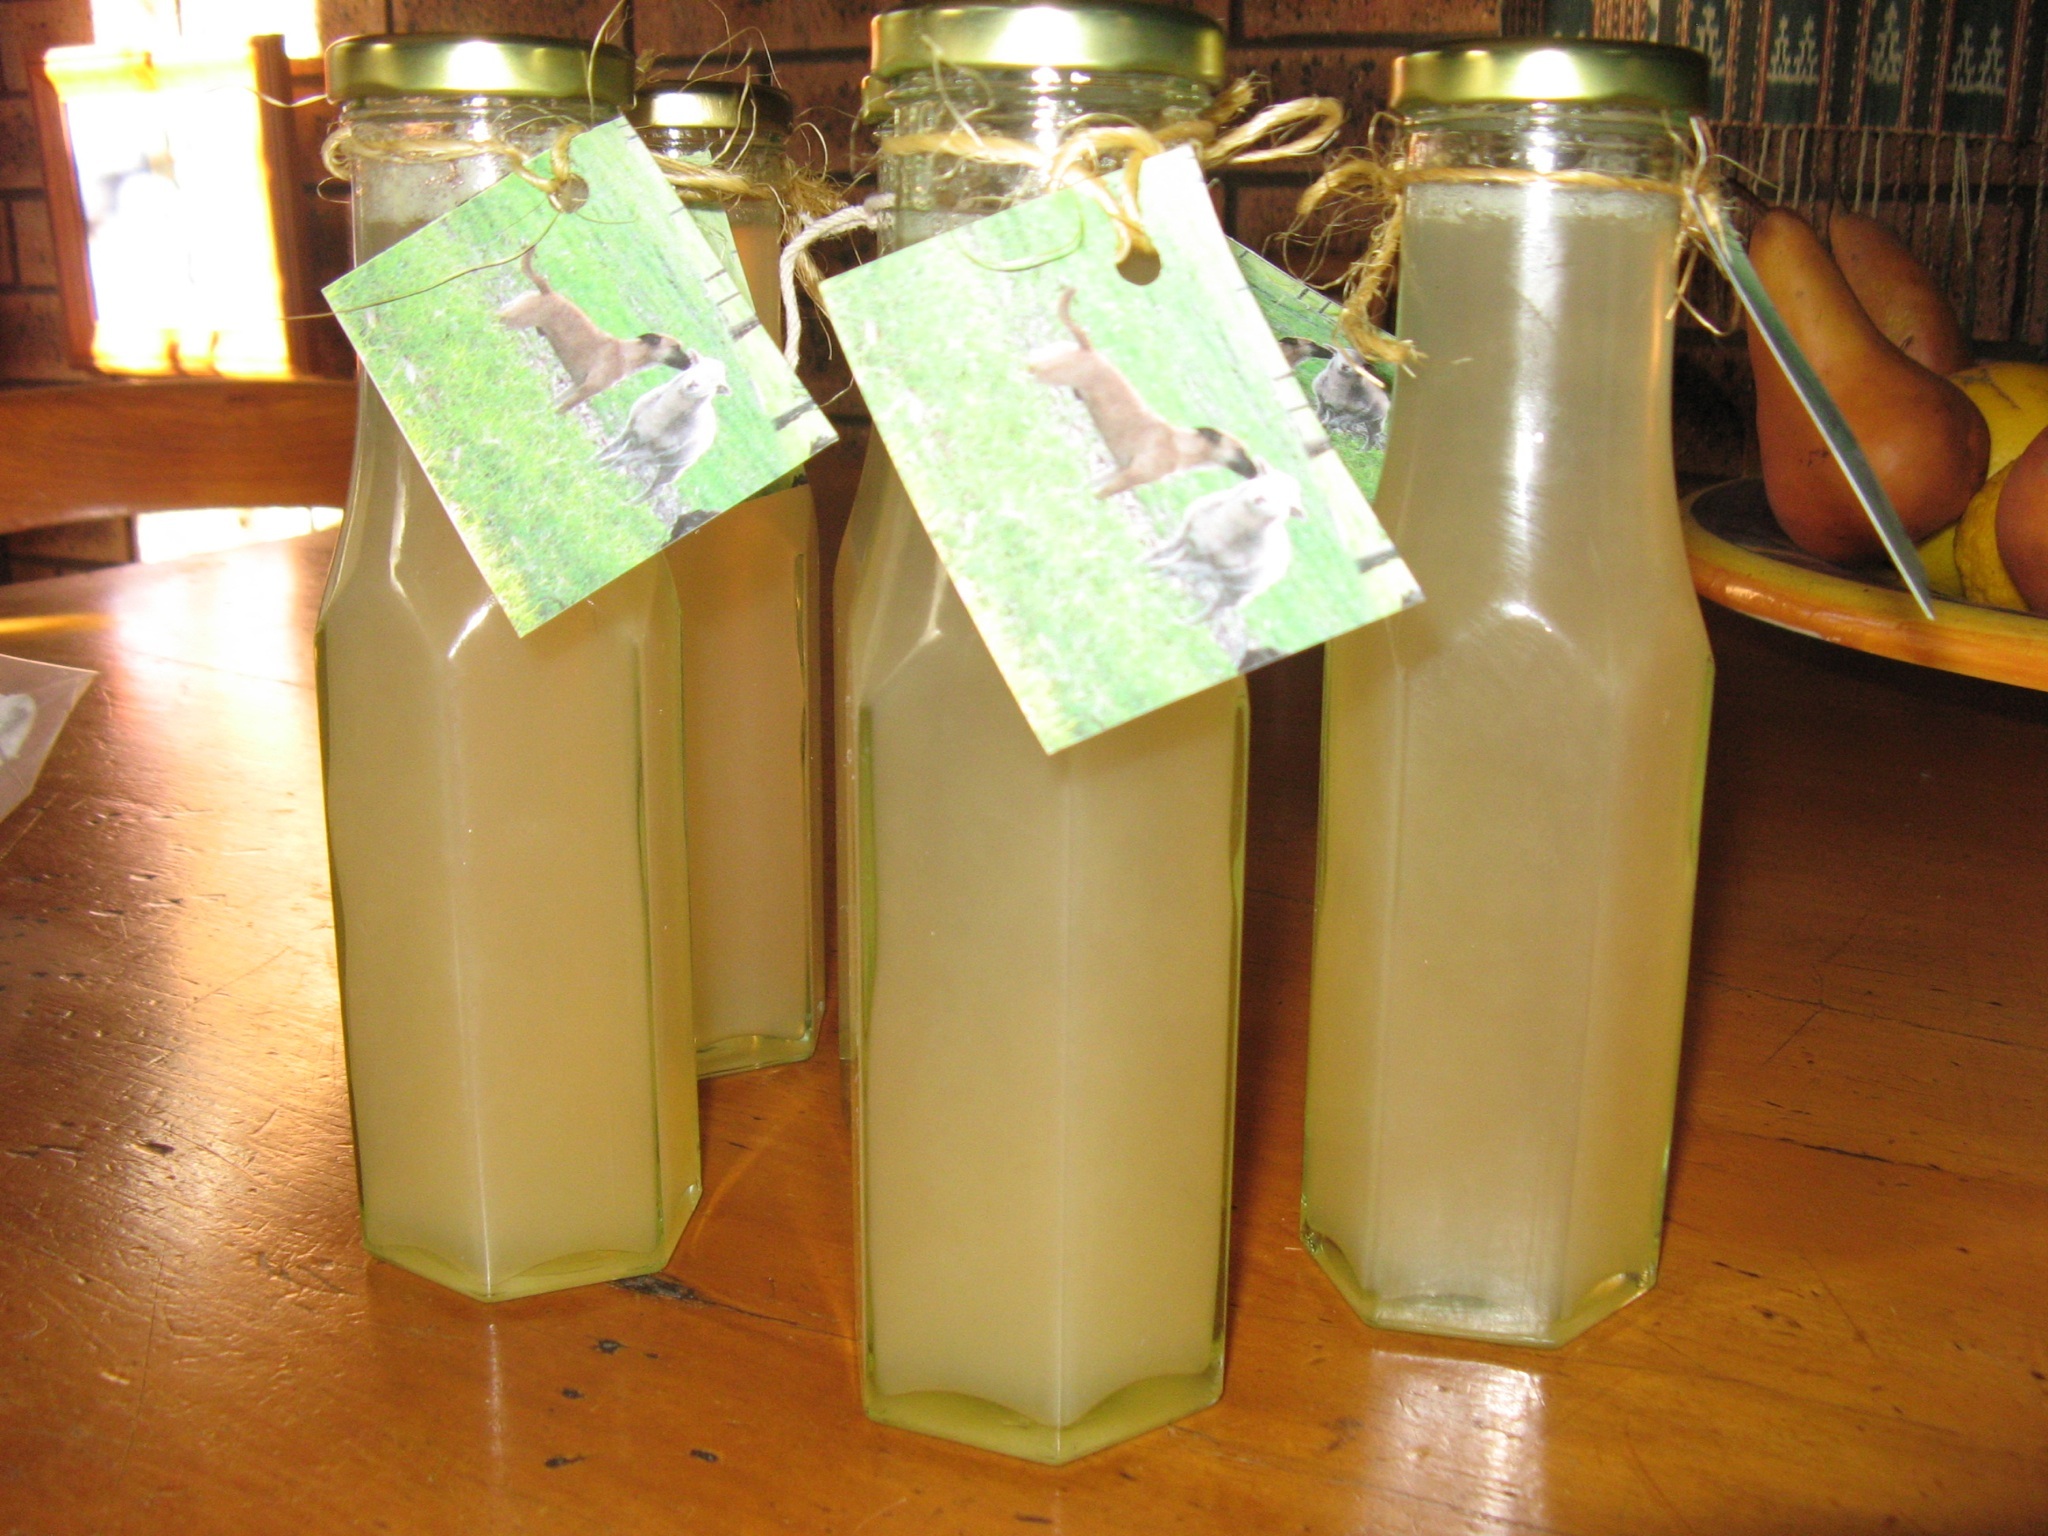 Ginger cordial made from home grown ginger